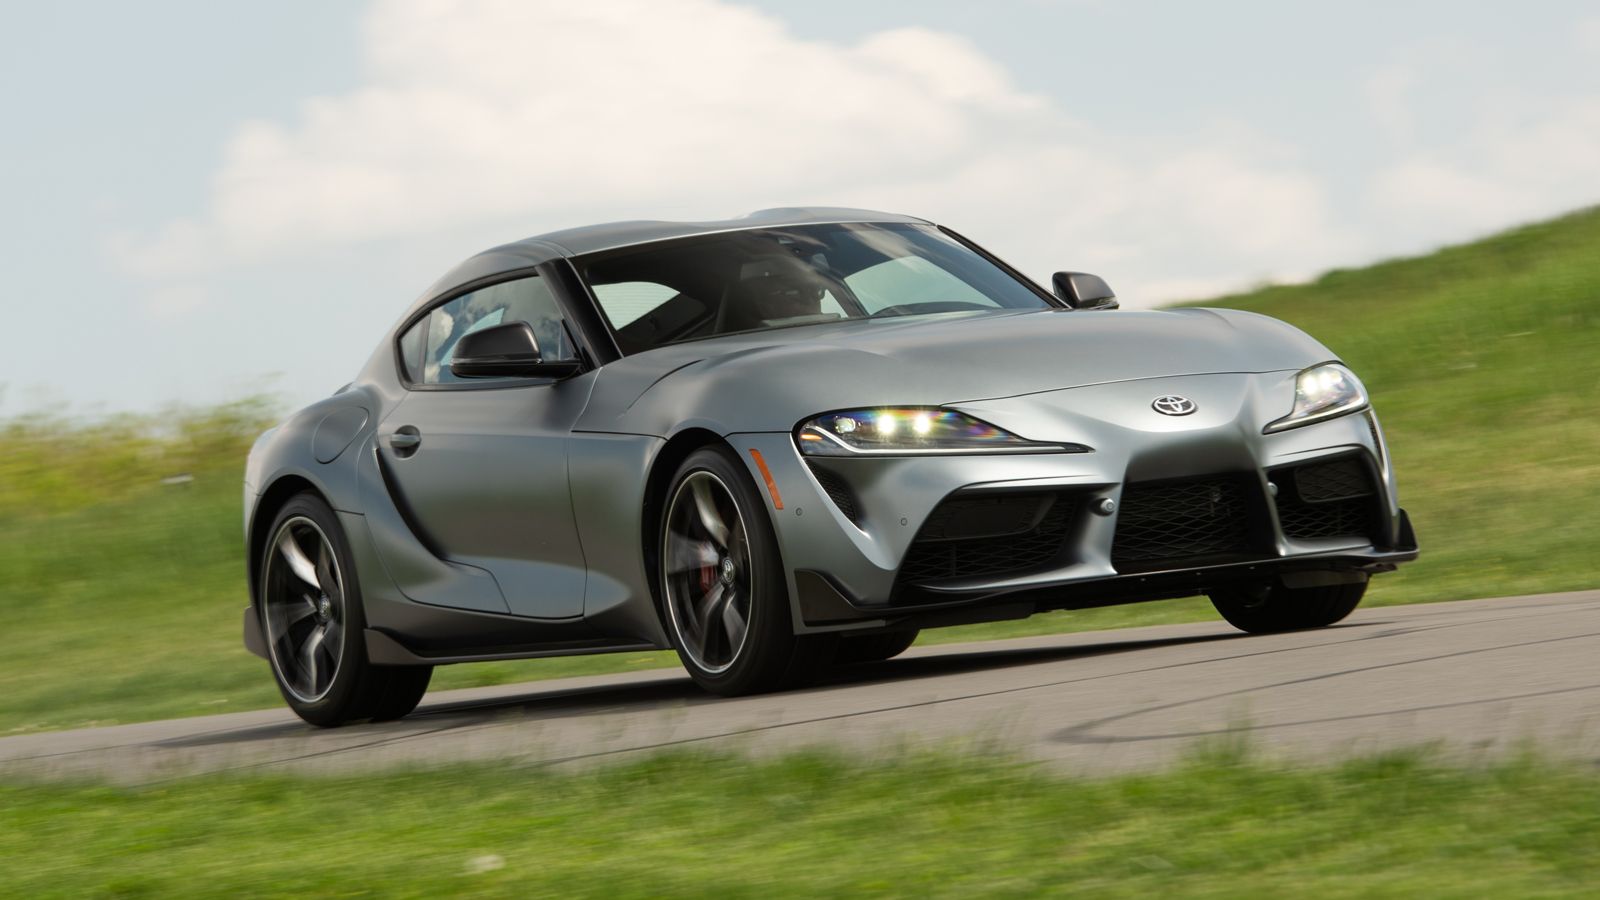 generations of the Toyota Supra, explained